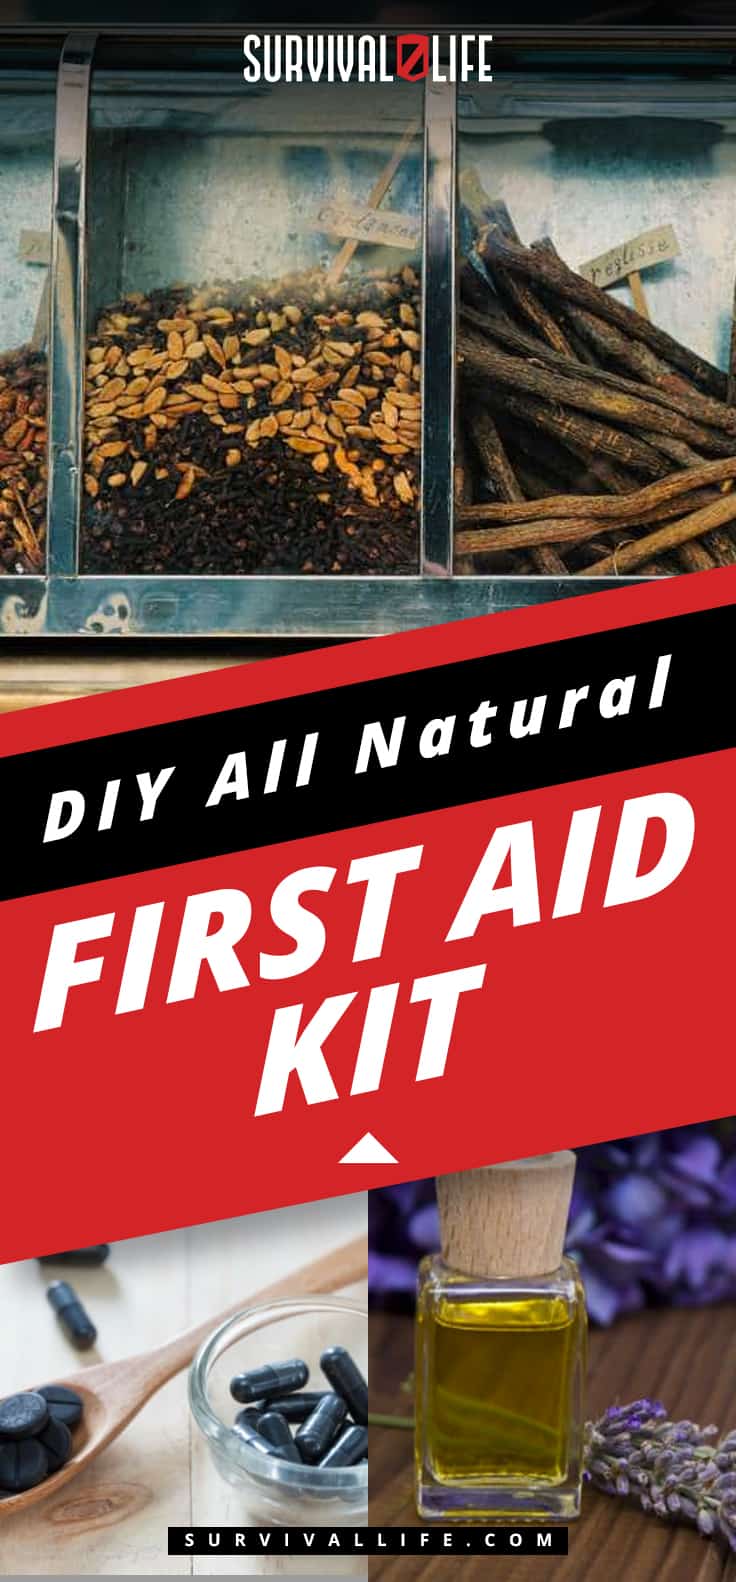 DIY All Natural First Aid Kit